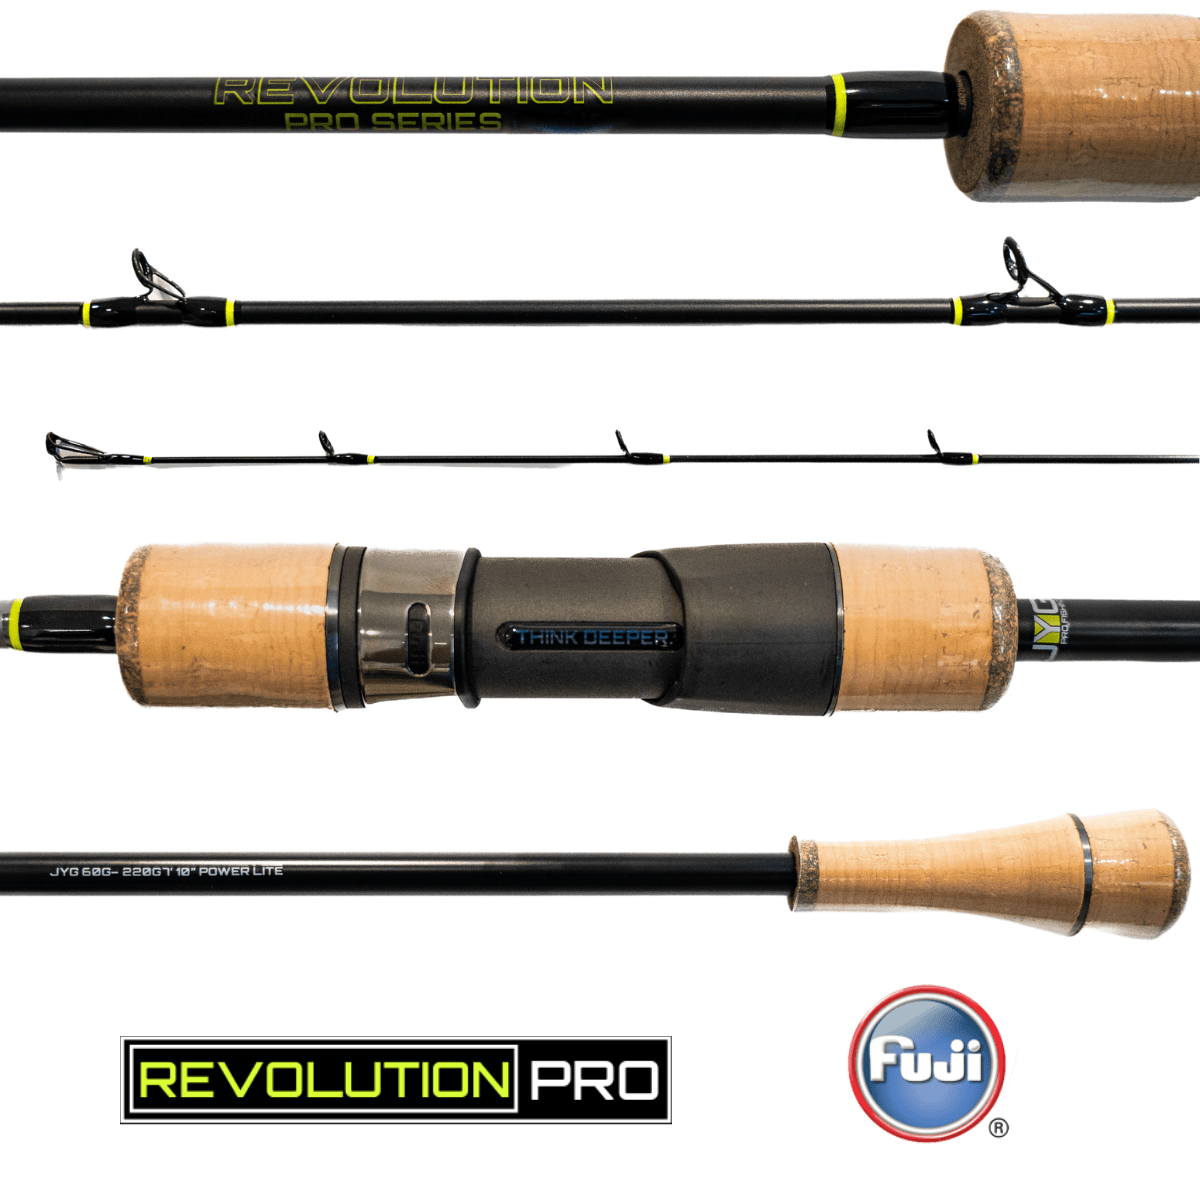 Jyg Pro Revolution Pro Series 6FT2IN Slow Pitch Jigging 2Pc Rod (Limit - CHAOS  Fishing